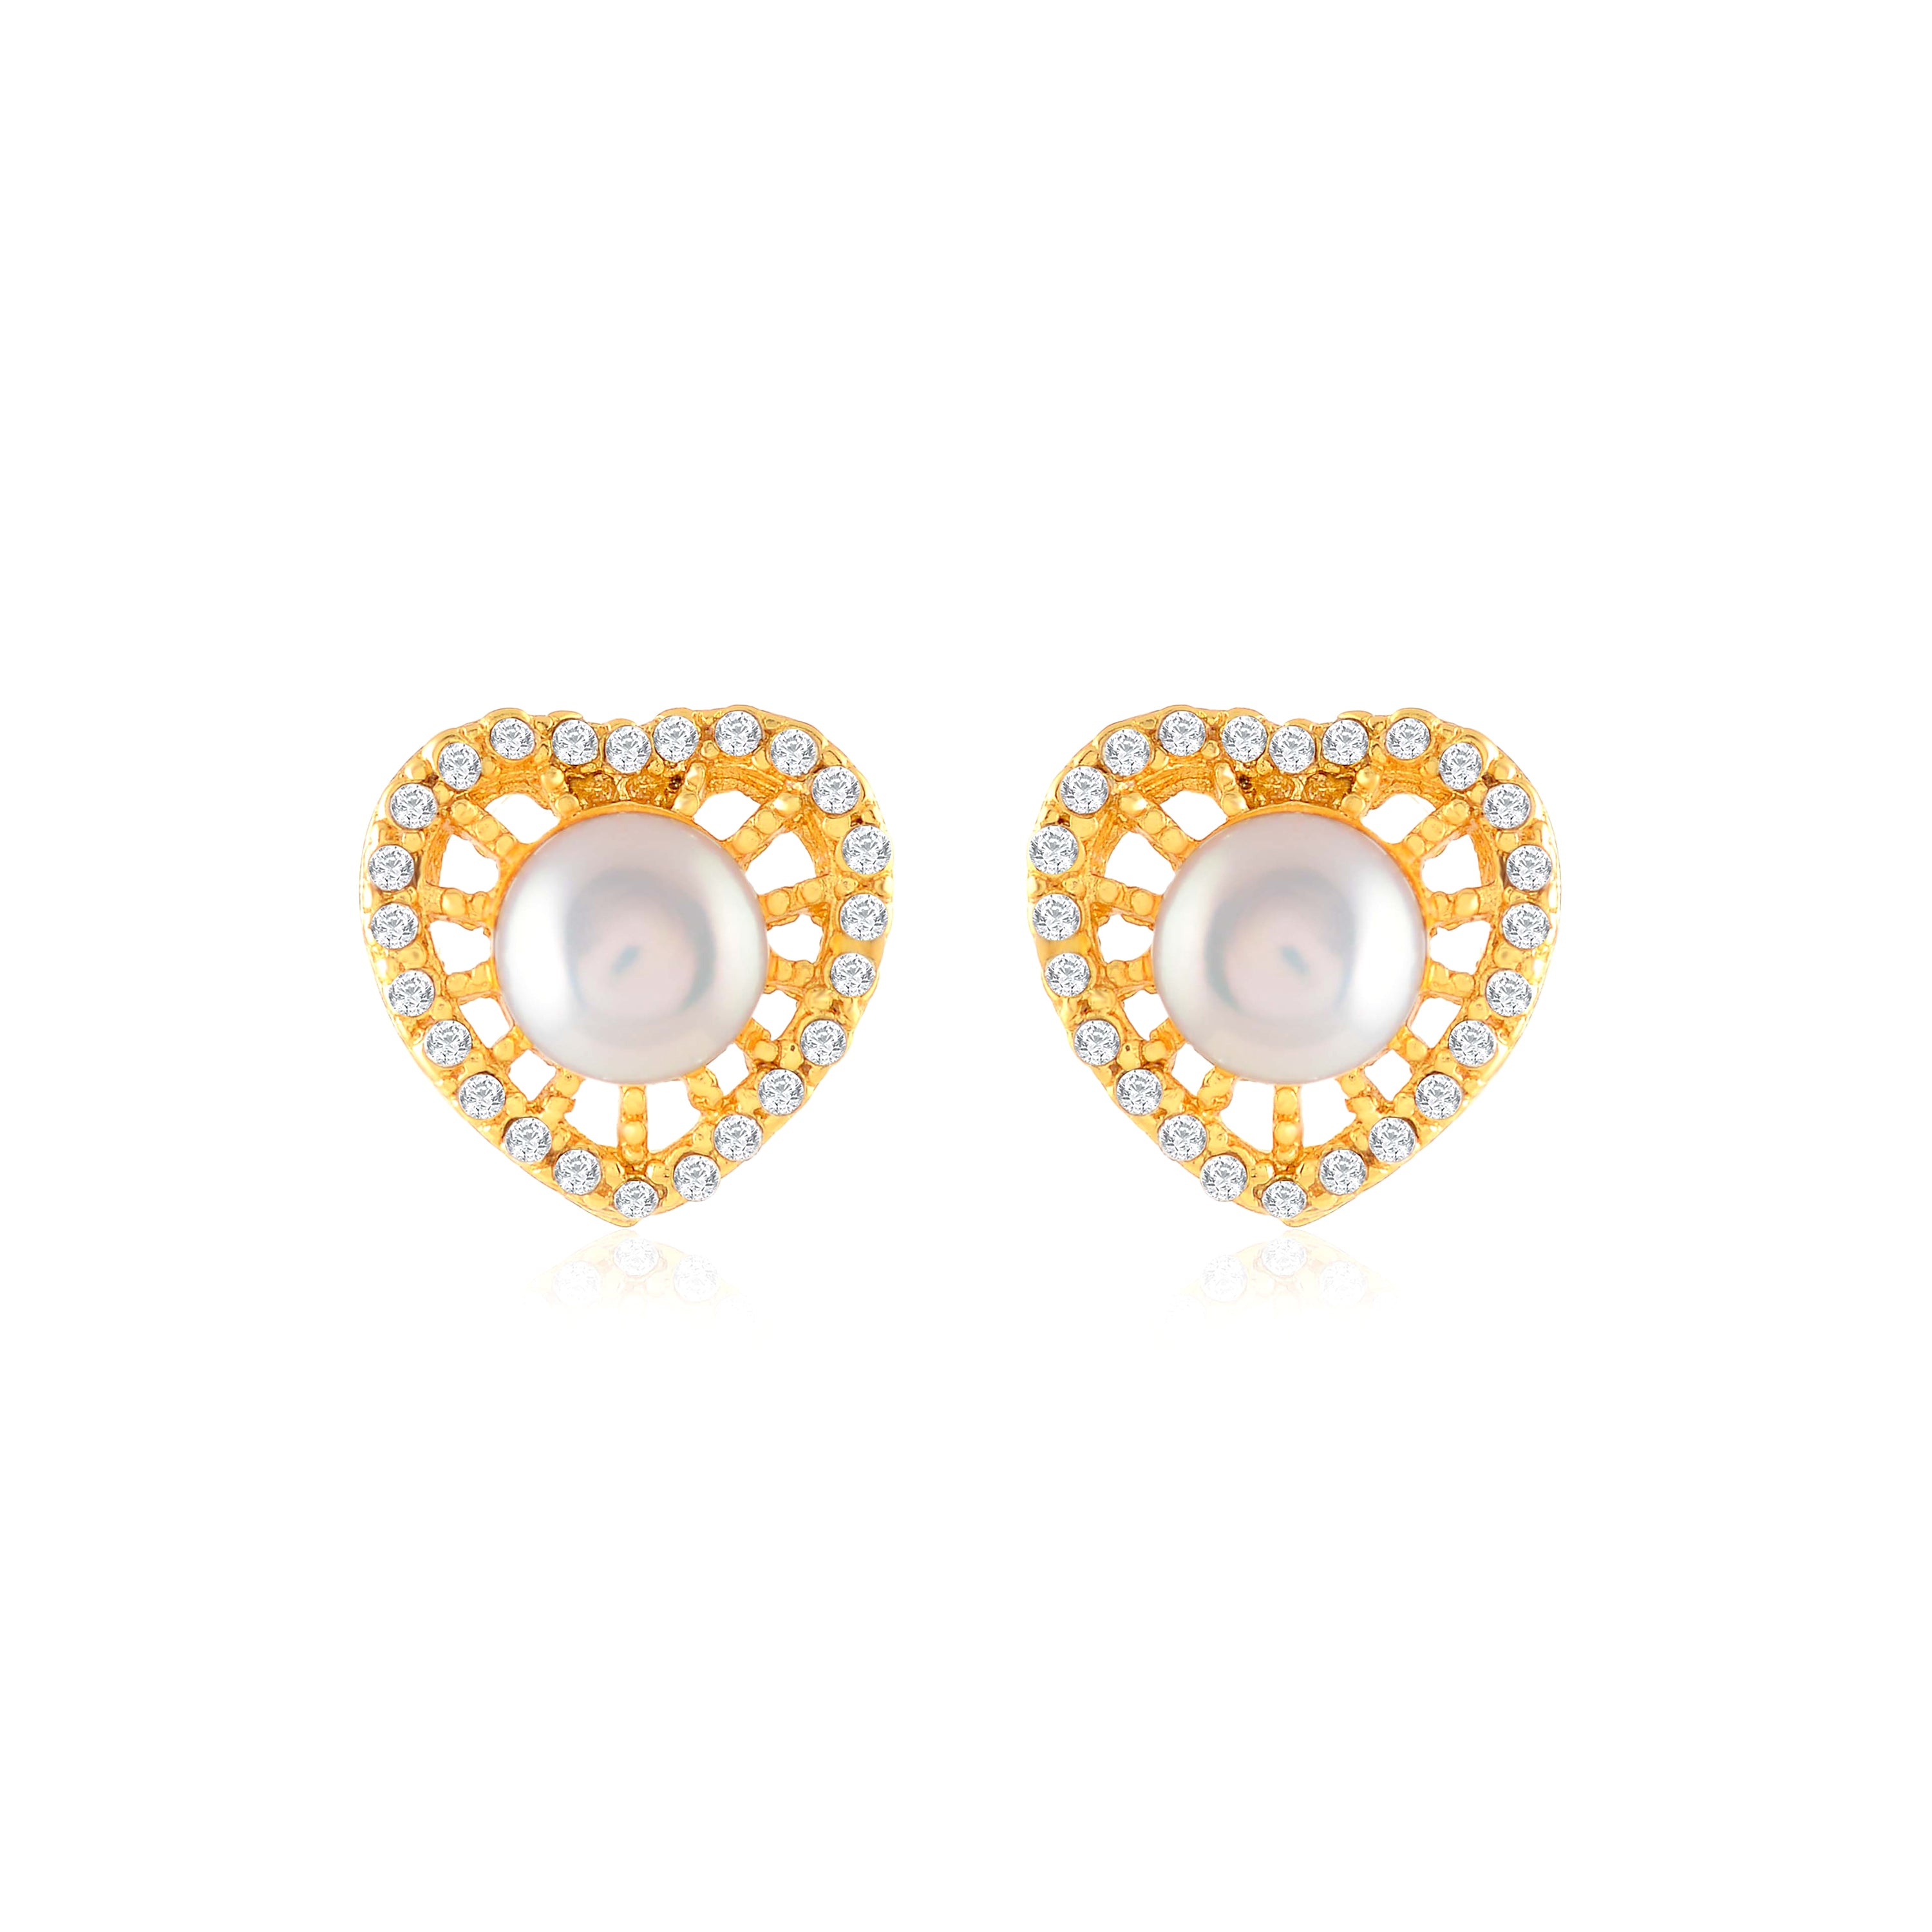 Double Layer Heart Shaped Pearl Earrings With Pendant